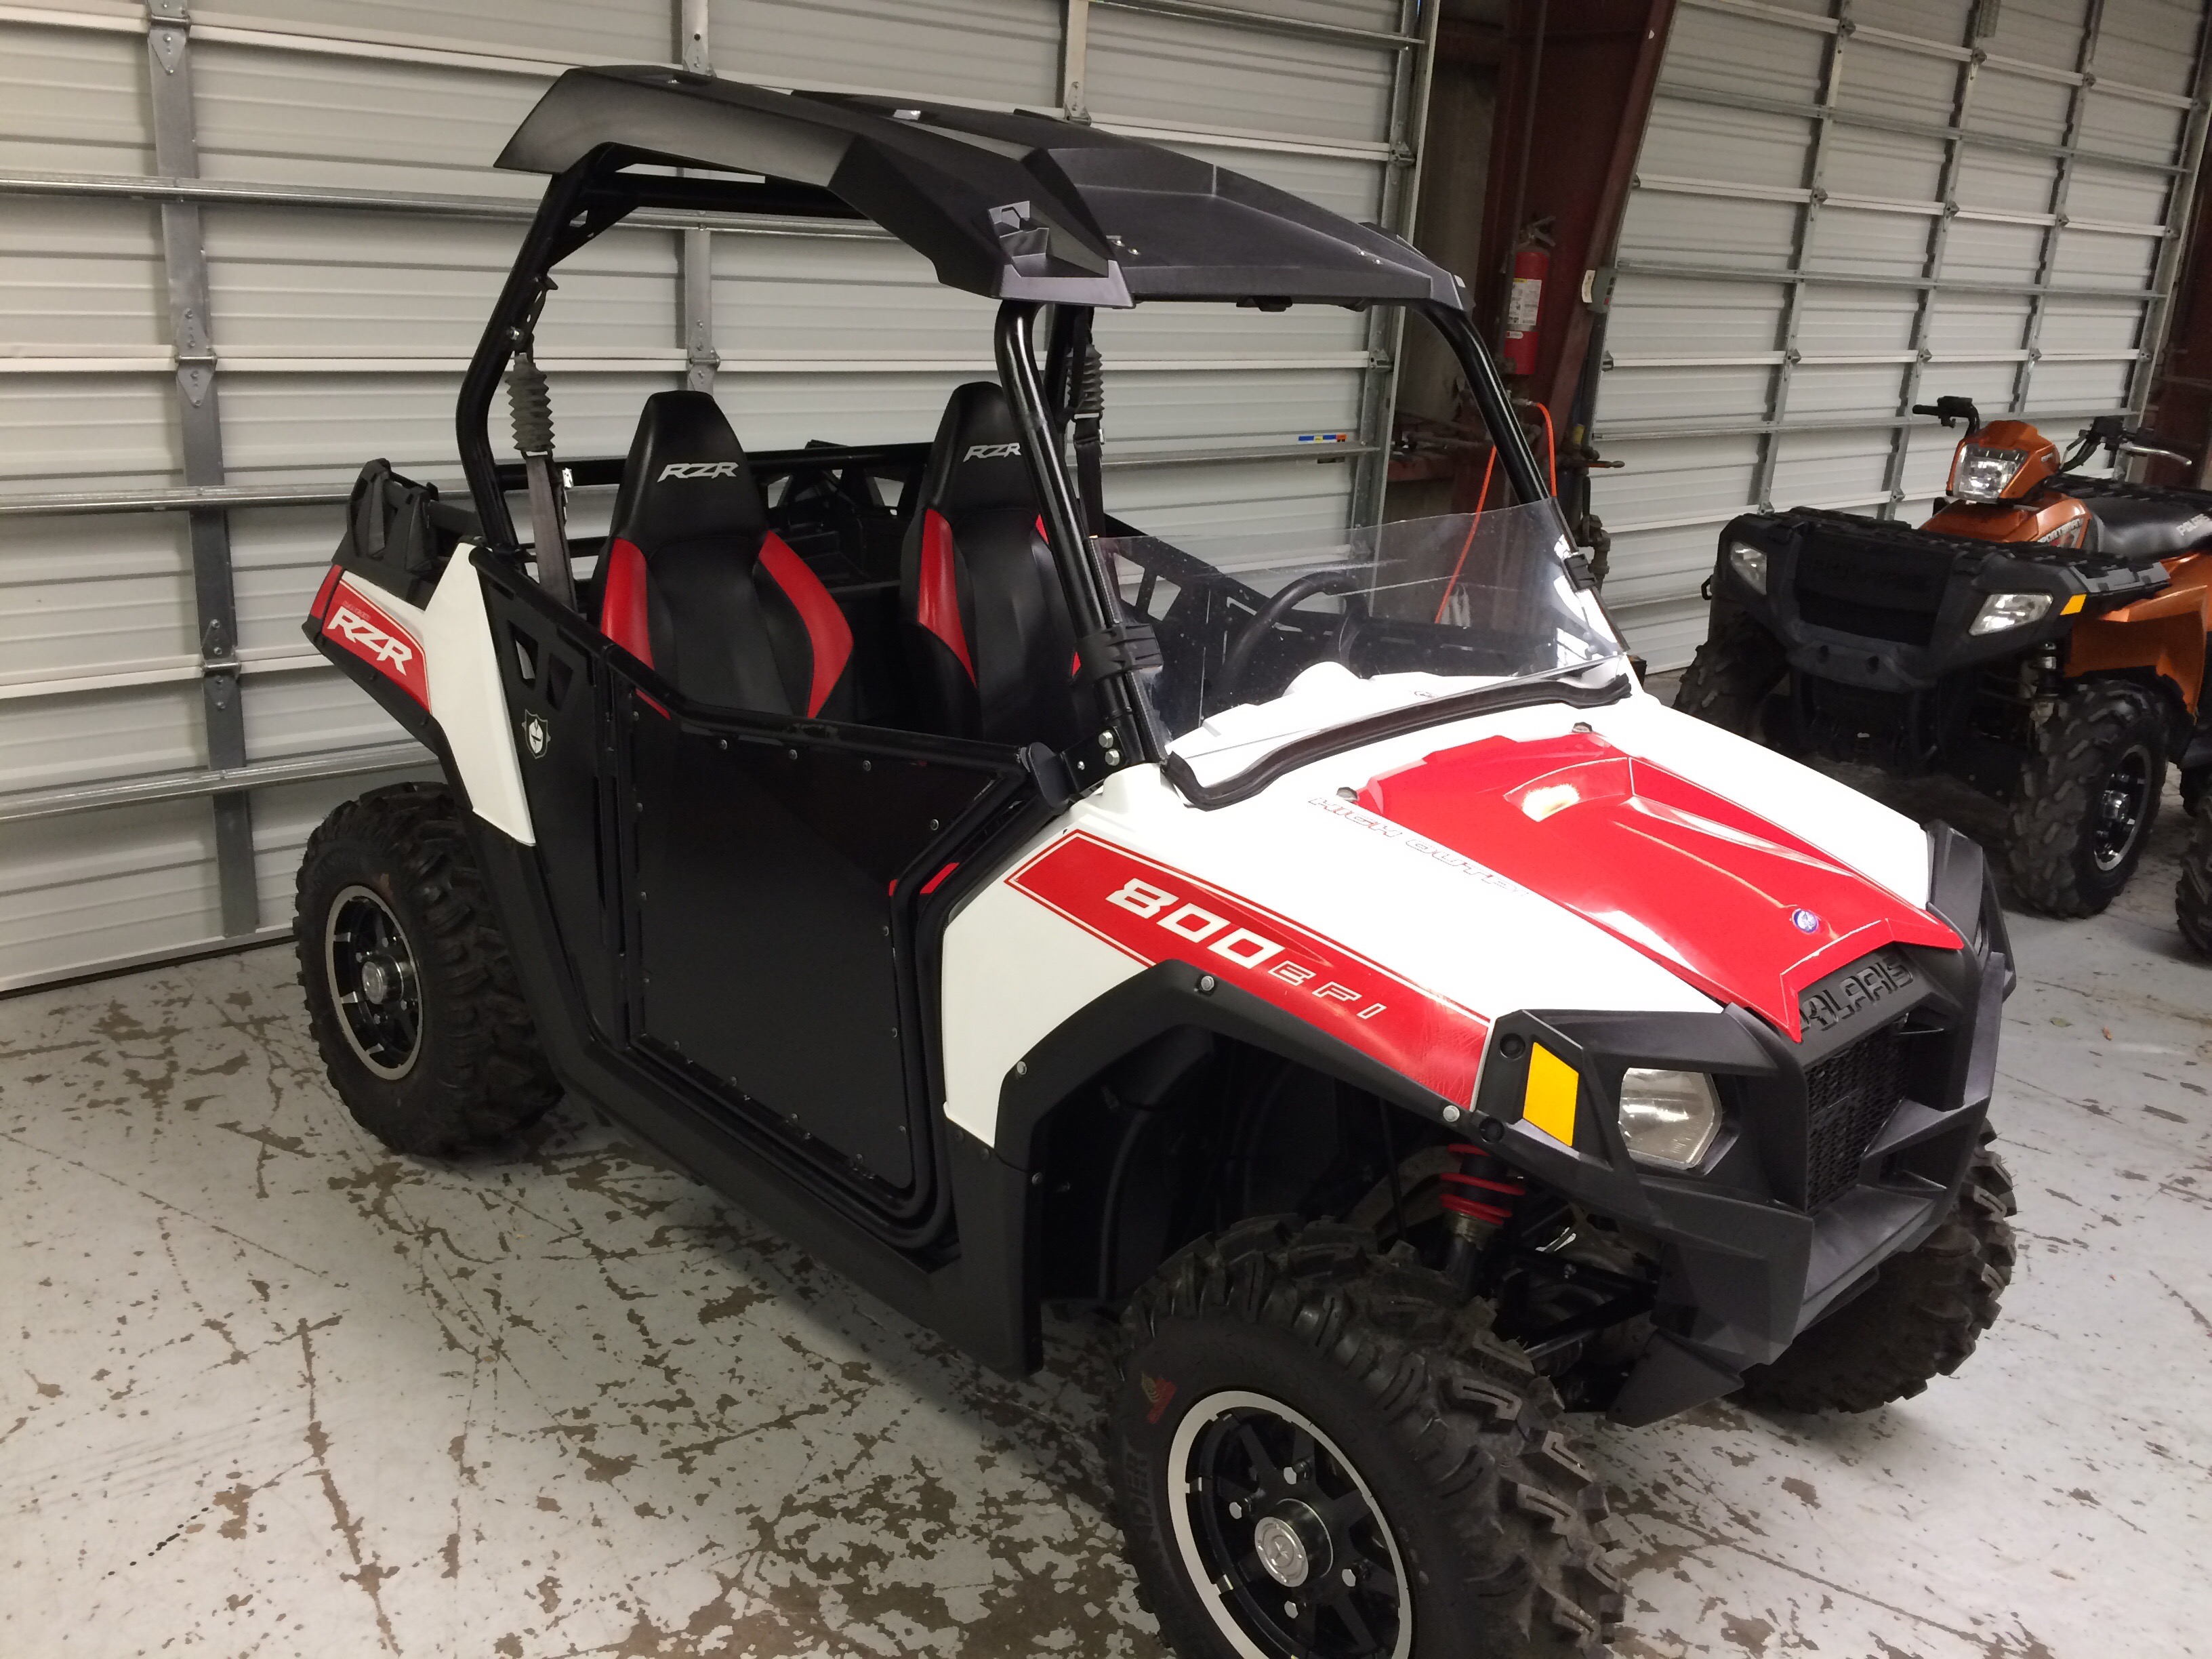 SOLD. 2012 Polaris Rzr 800 limited edition. 50" trail. Pro armor doors. 3800 miles, new tires